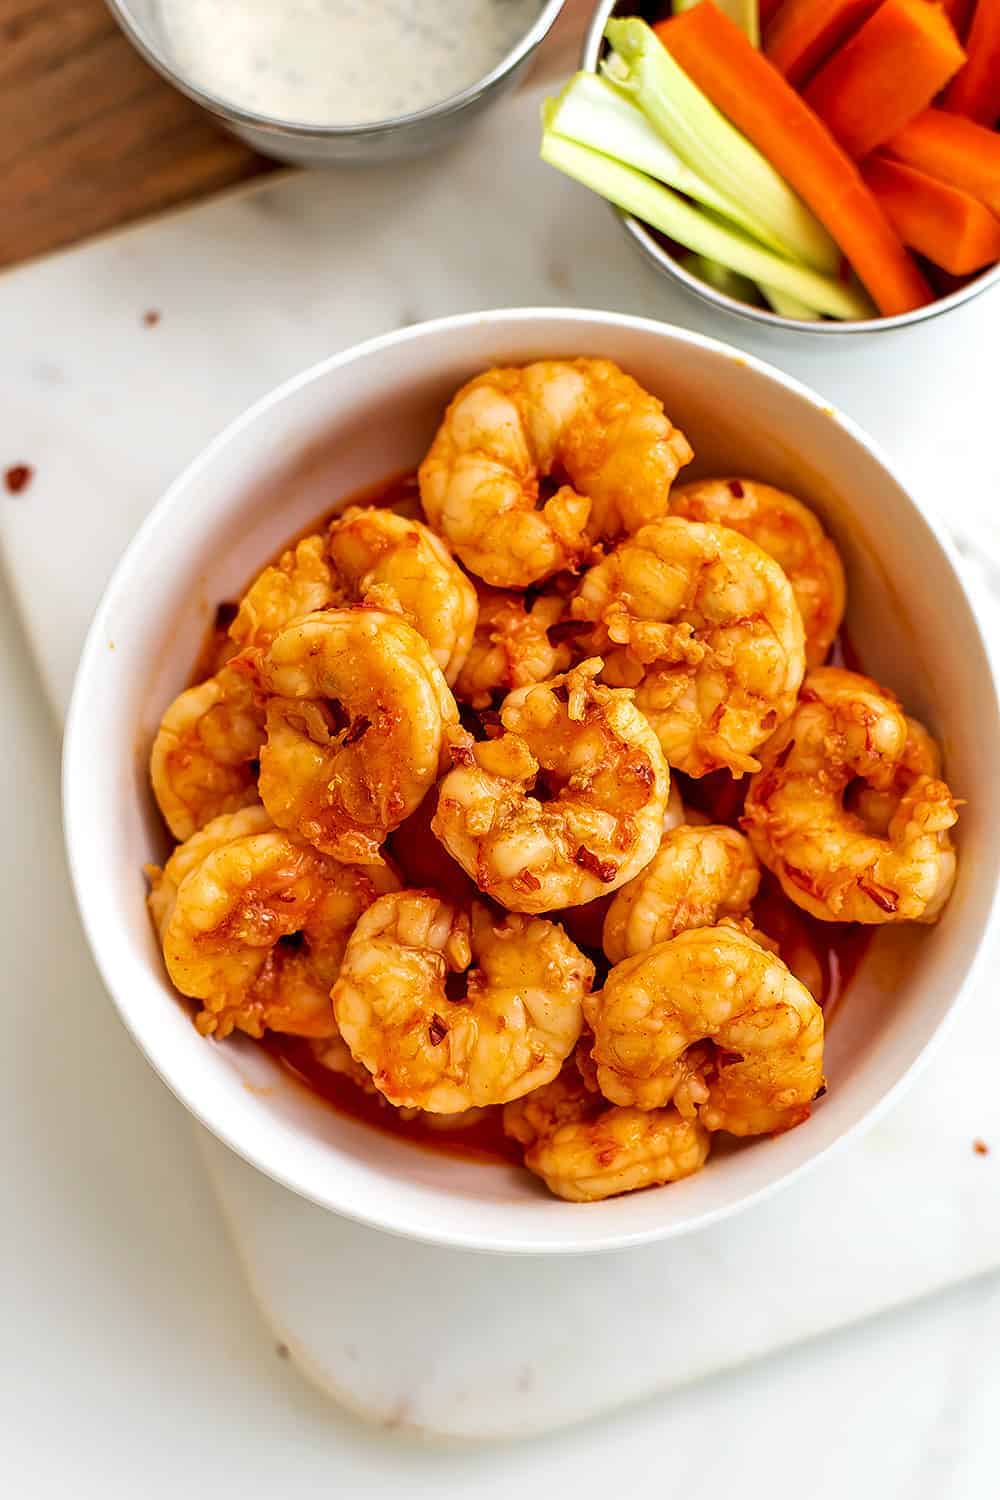 A delectable keto shrimp dish featuring a bowl of fried shrimp and vegetables on a cutting board.